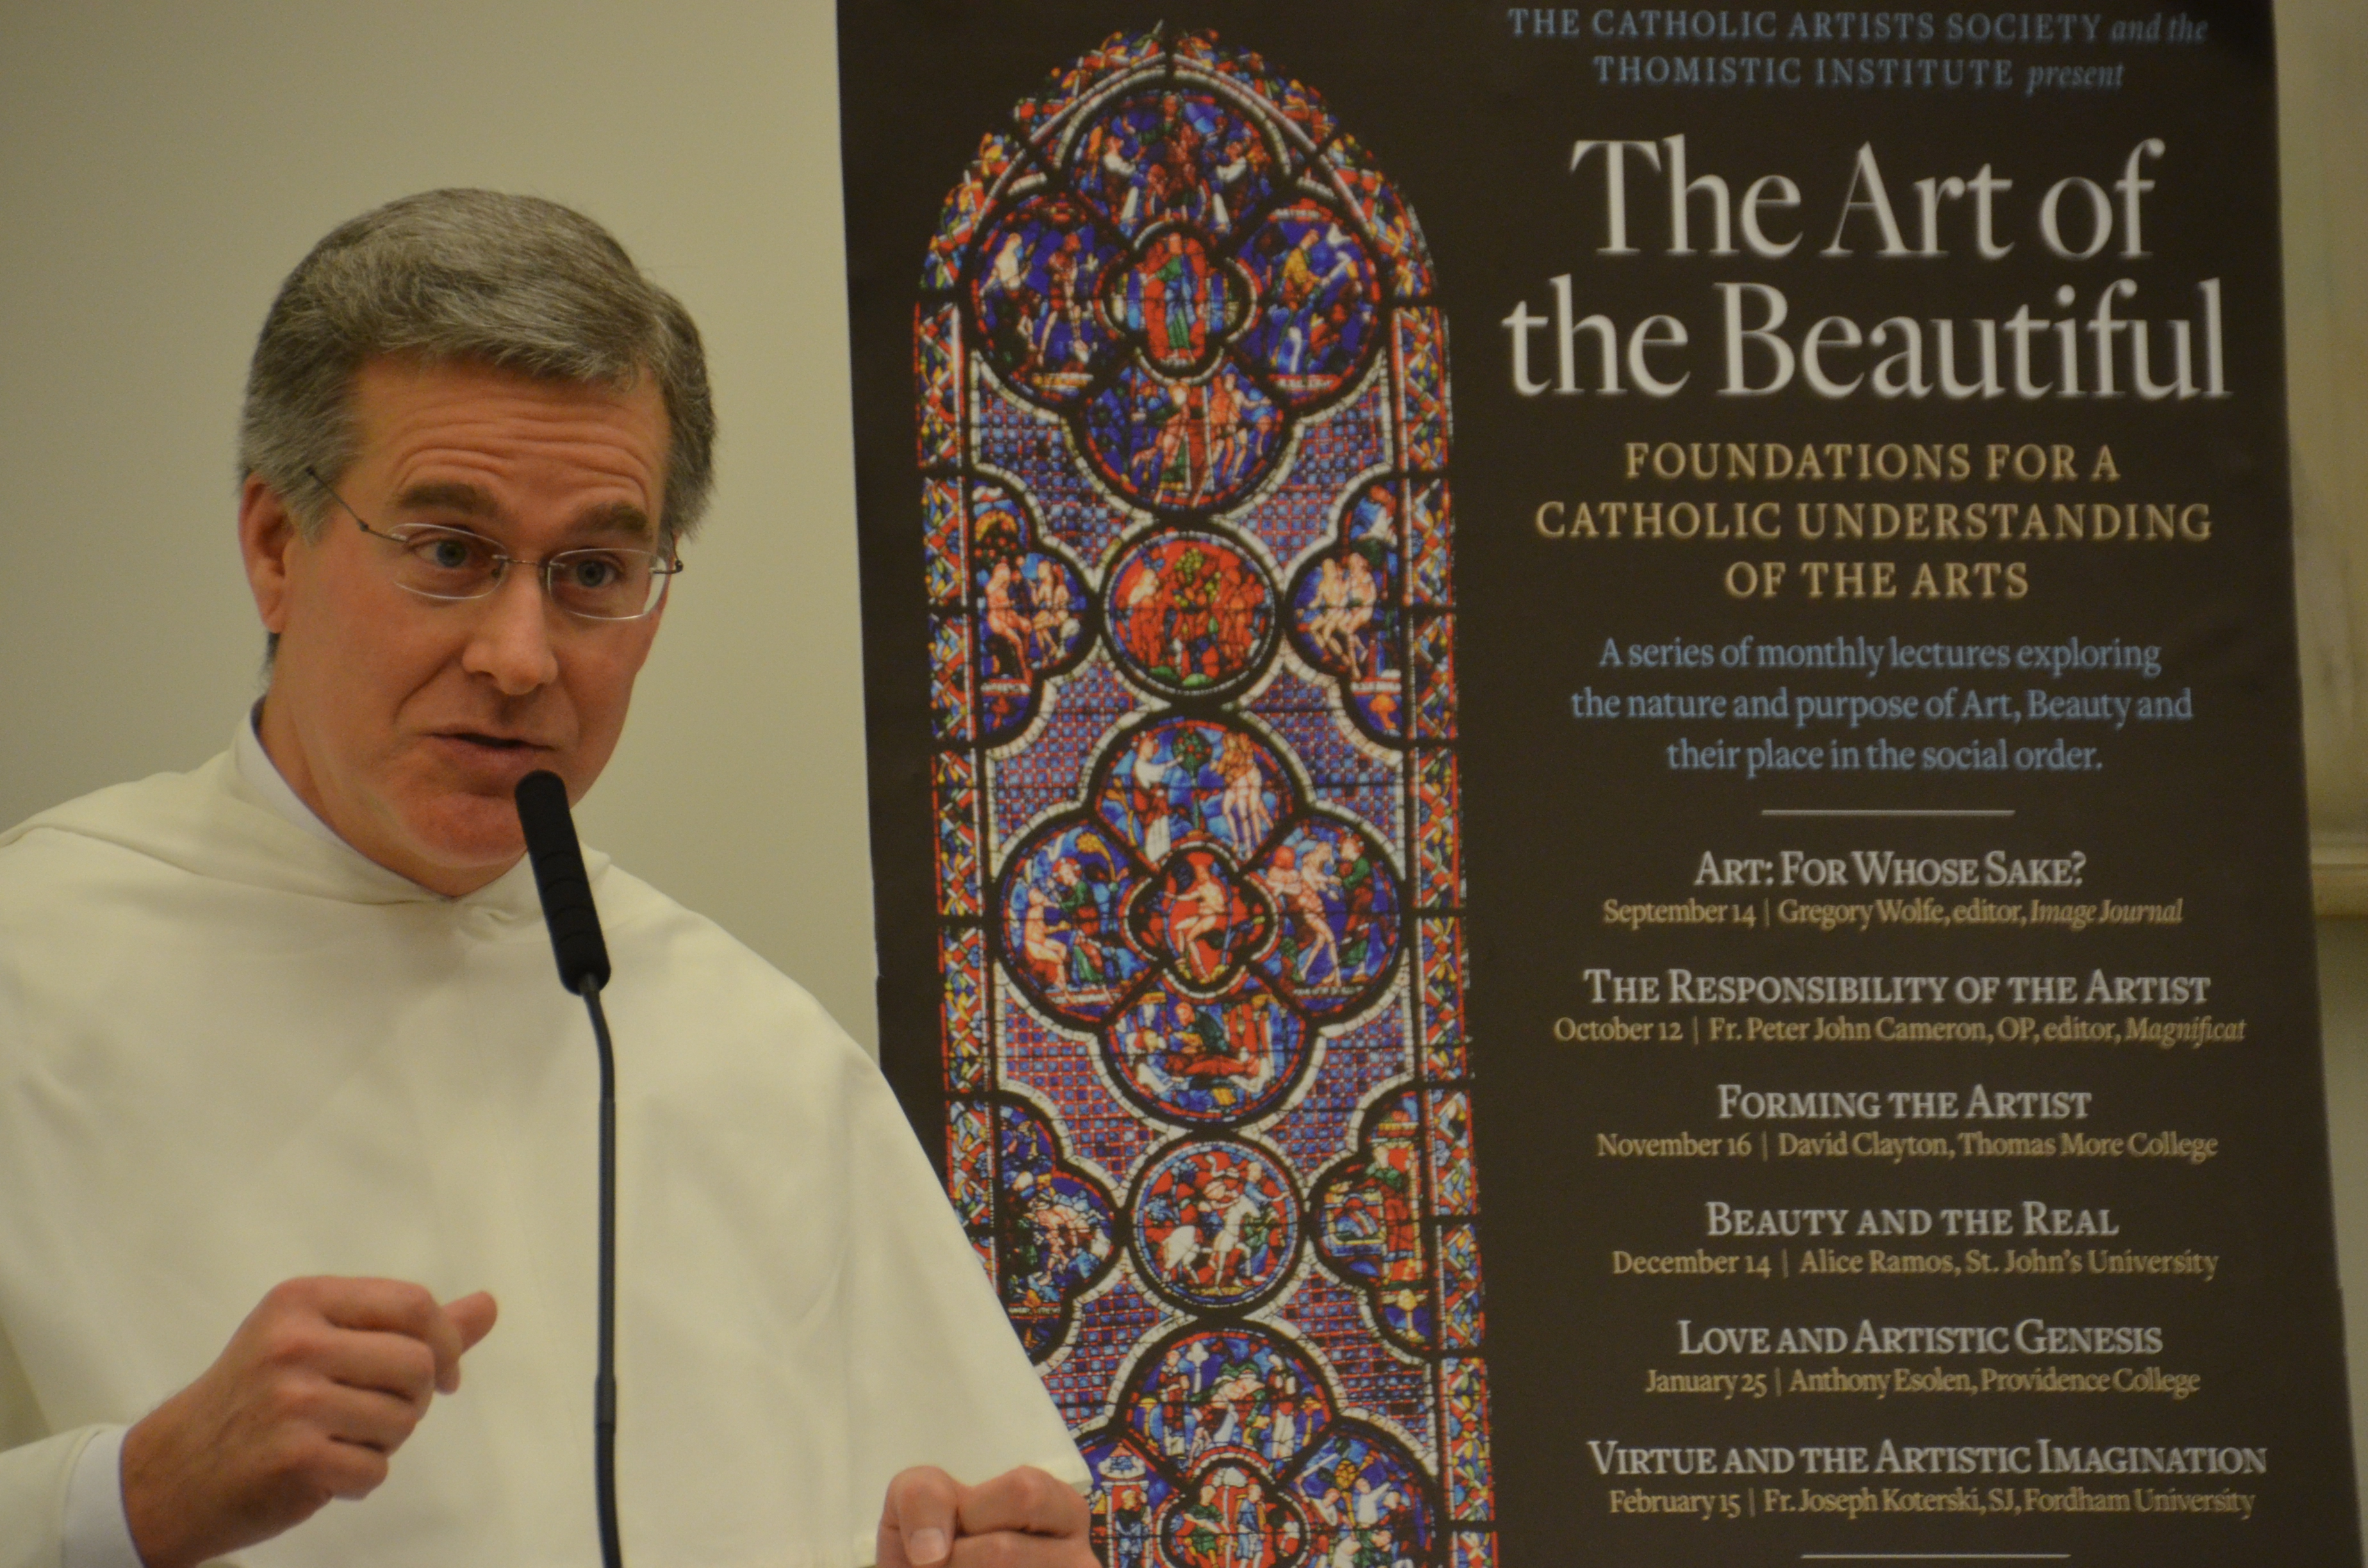 The Responsibility of the Artist” with Rev. Peter John Cameron, OP –  recording and photos – Catholic Artists Society